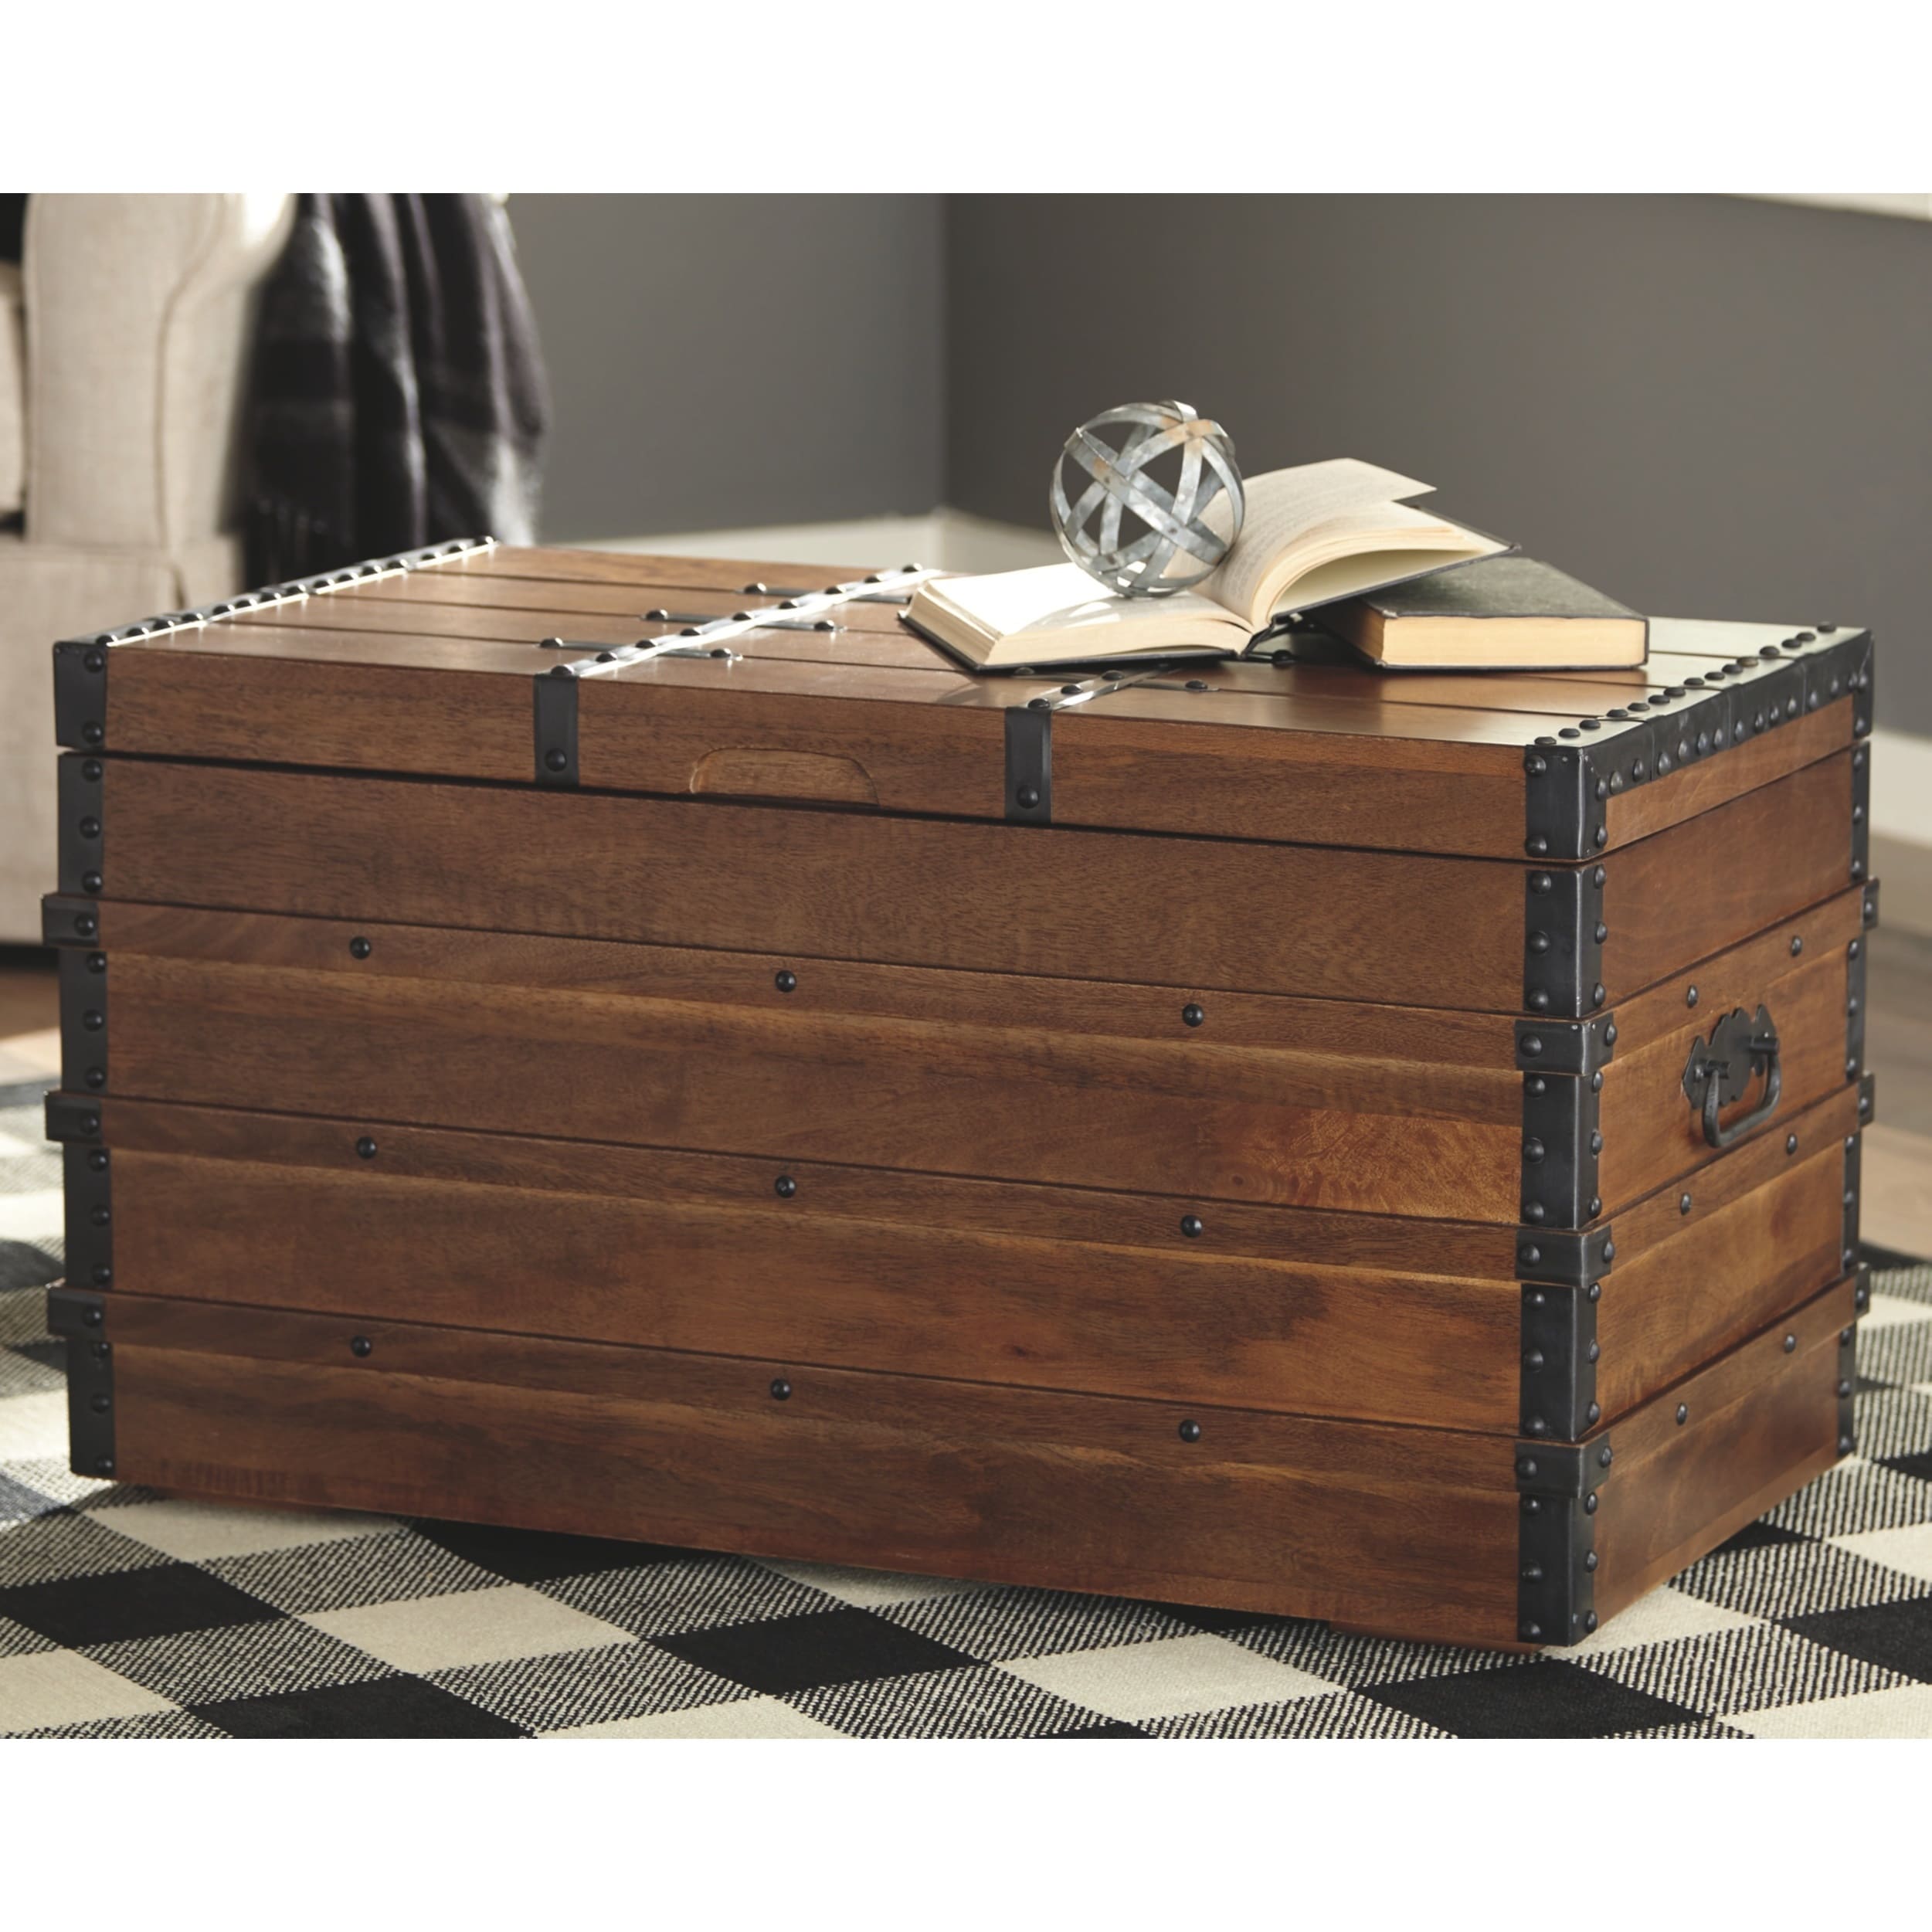 https://ak1.ostkcdn.com/images/products/26479875/Signature-Design-by-Ashley-Kettleby-Brown-Wood-Storage-Trunk-9d48e9ef-fb18-43a7-9bc2-a39556a0597d.jpg